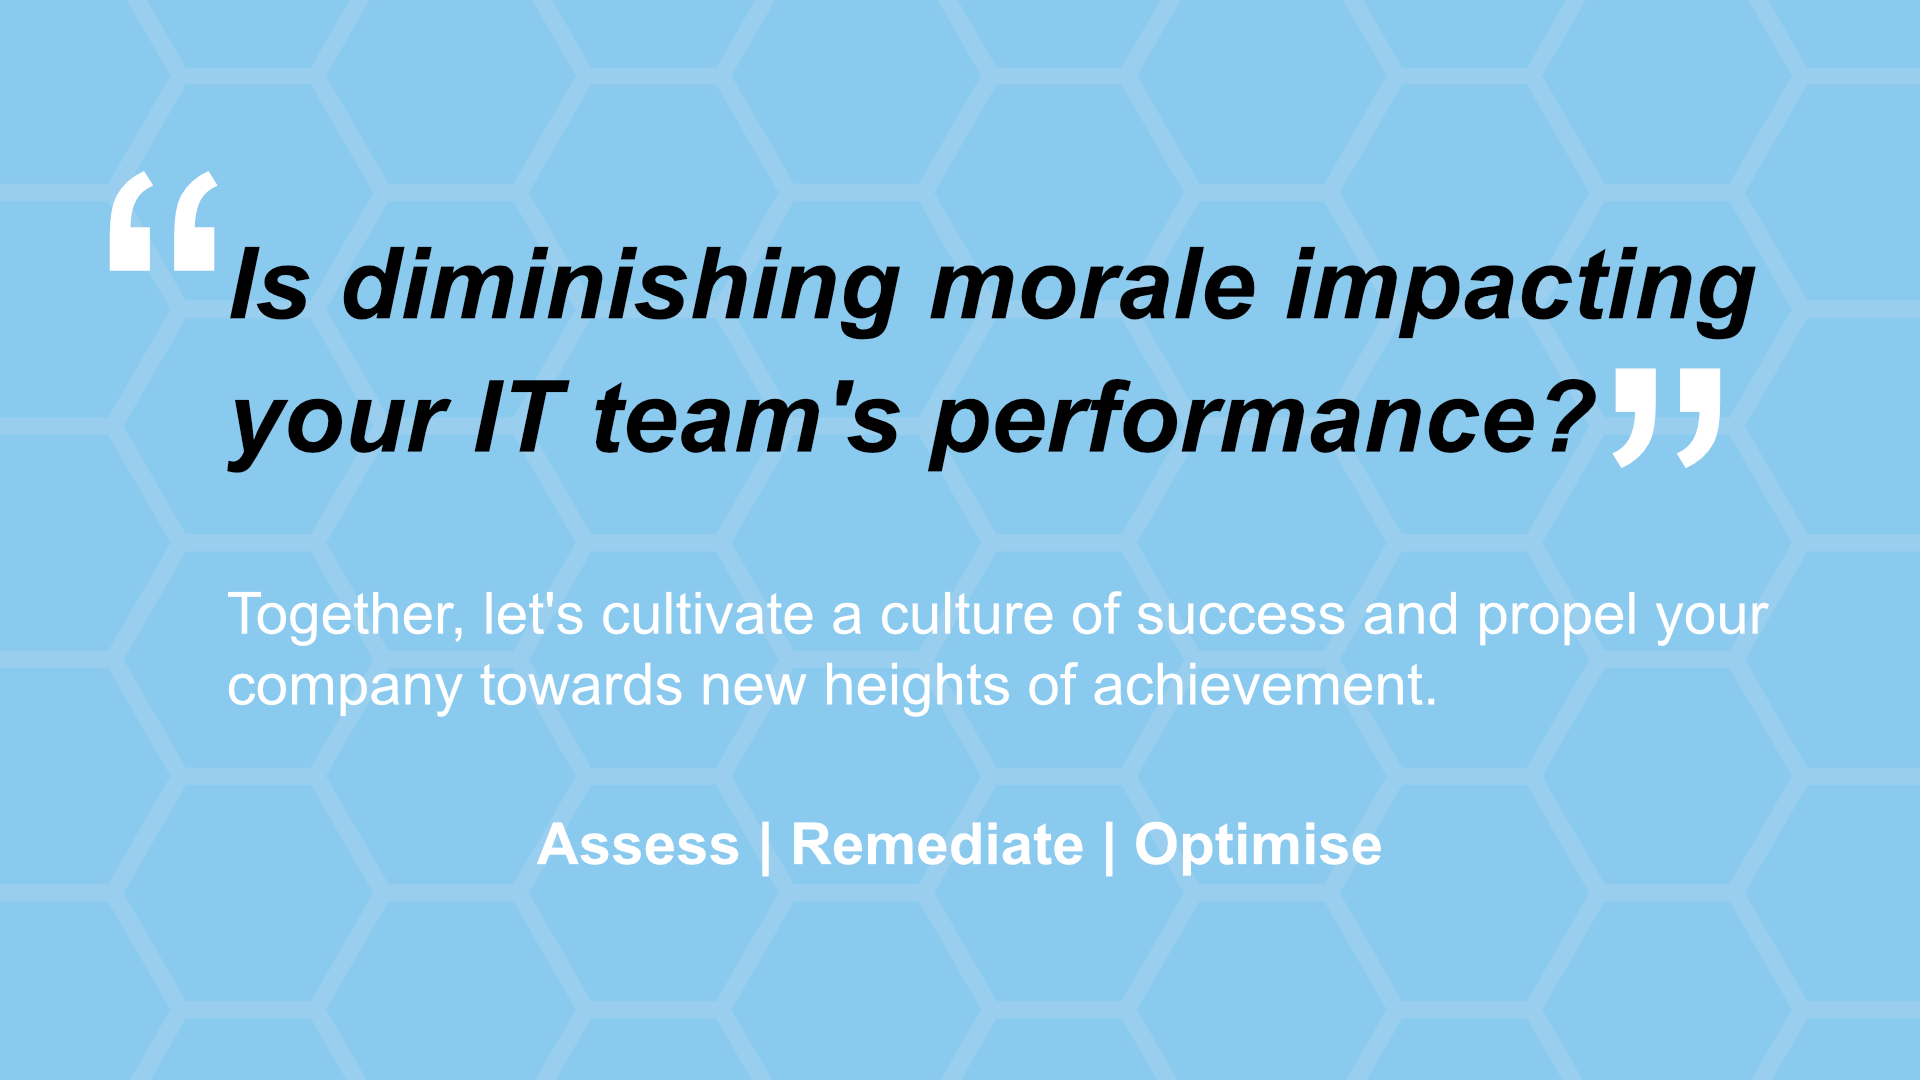 Enhancing Team Morale: How Our Assess-Remediate-Optimise Services Drive Rapid Benefits for C-Suite Leaders